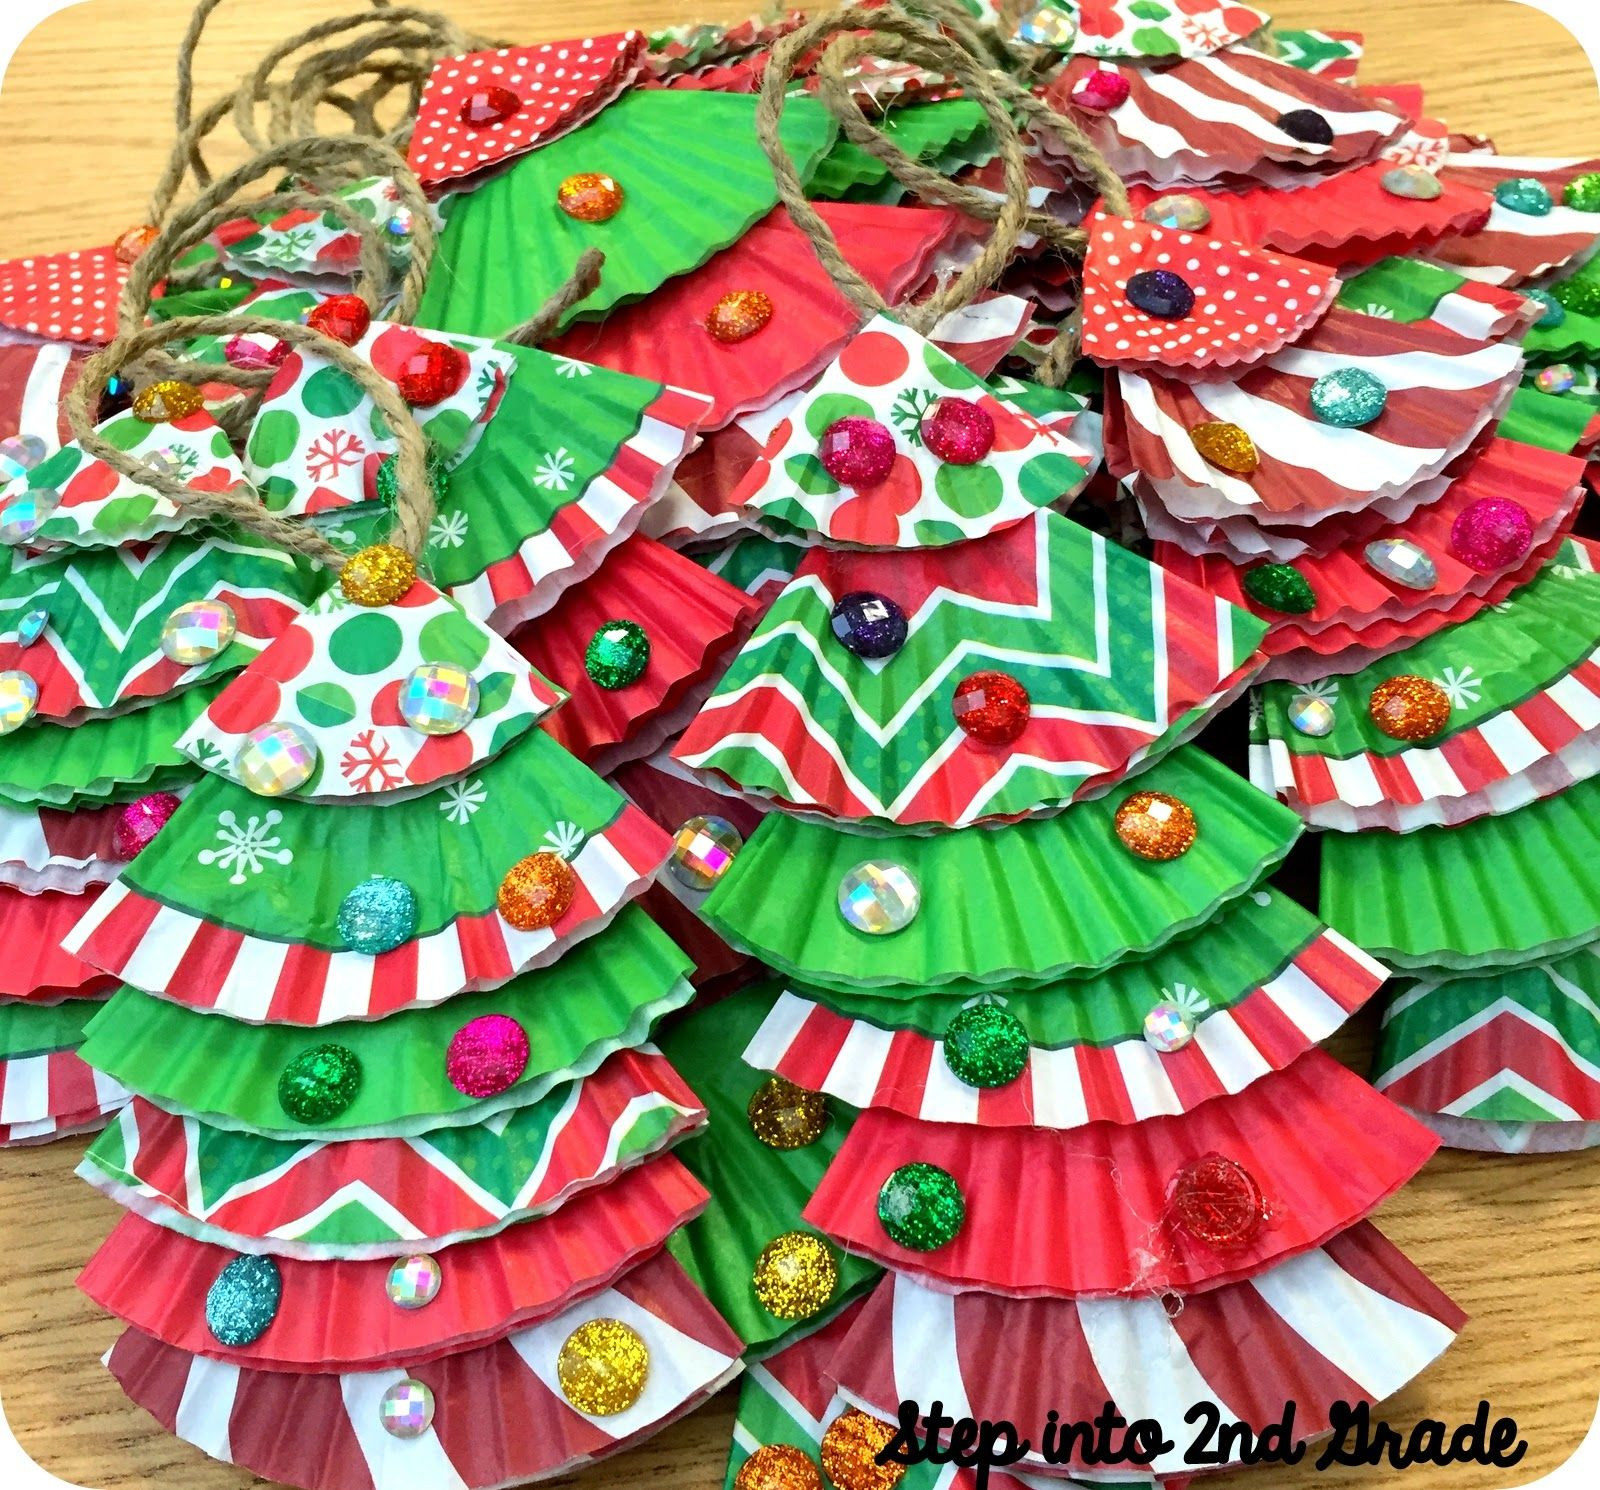 2Nd Grade Holiday Party Ideas
 Step into 2nd Grade with Mrs Lemons A Whole Lotta